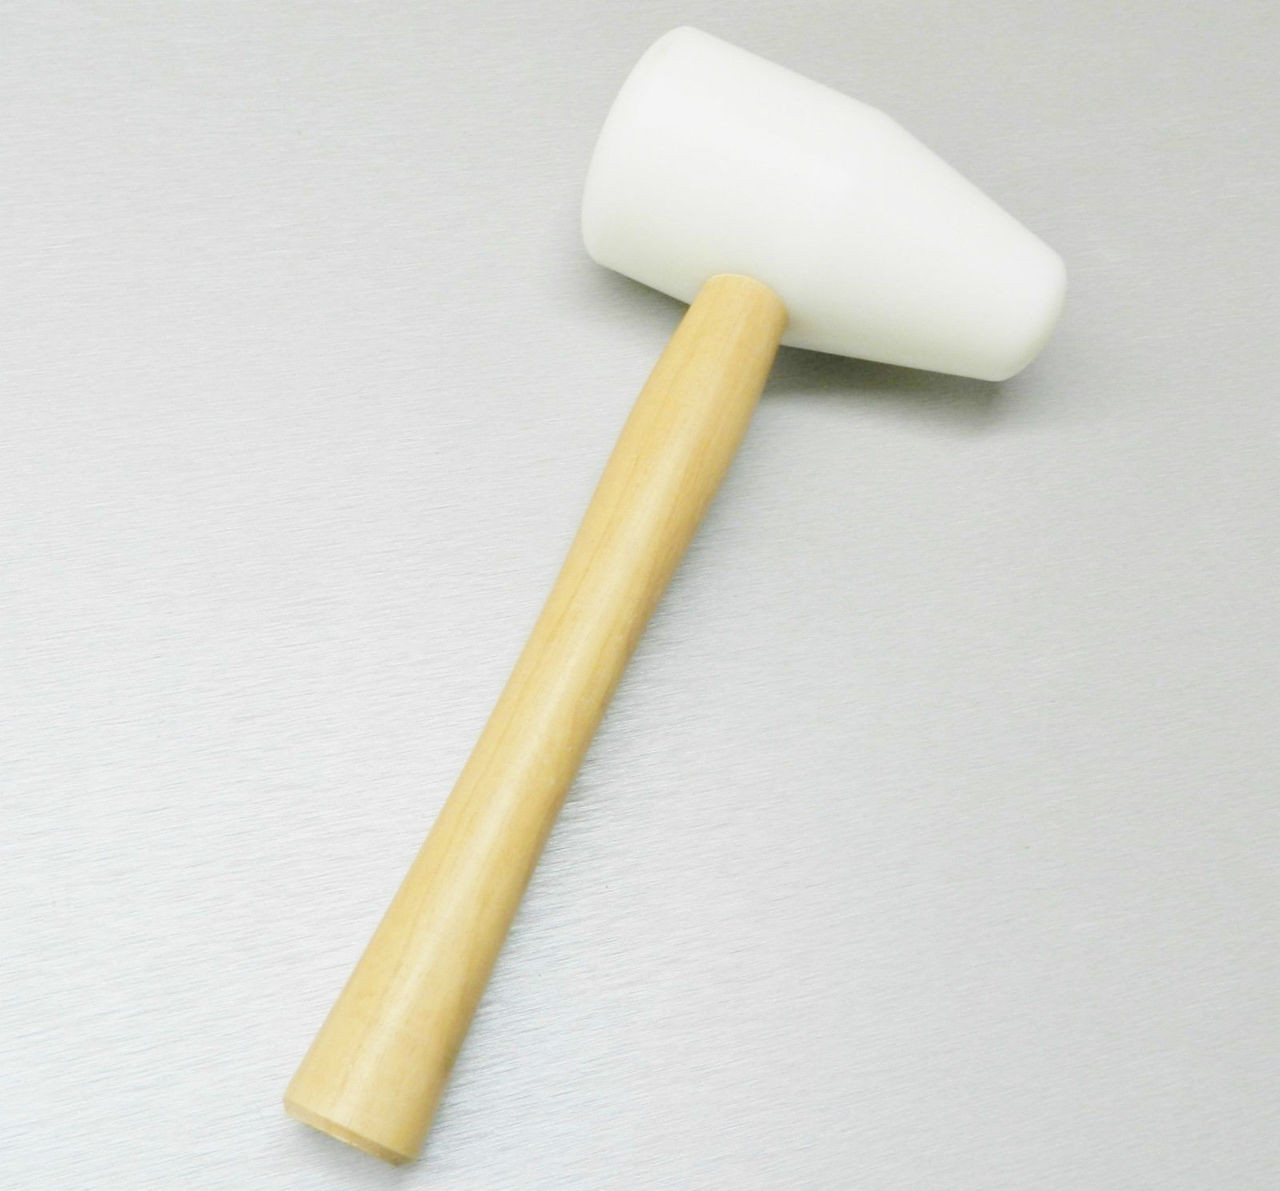 Nylon Hammer X Large Plastic Mallet 2-1/2" Face Jewelry Metalsmith Forming